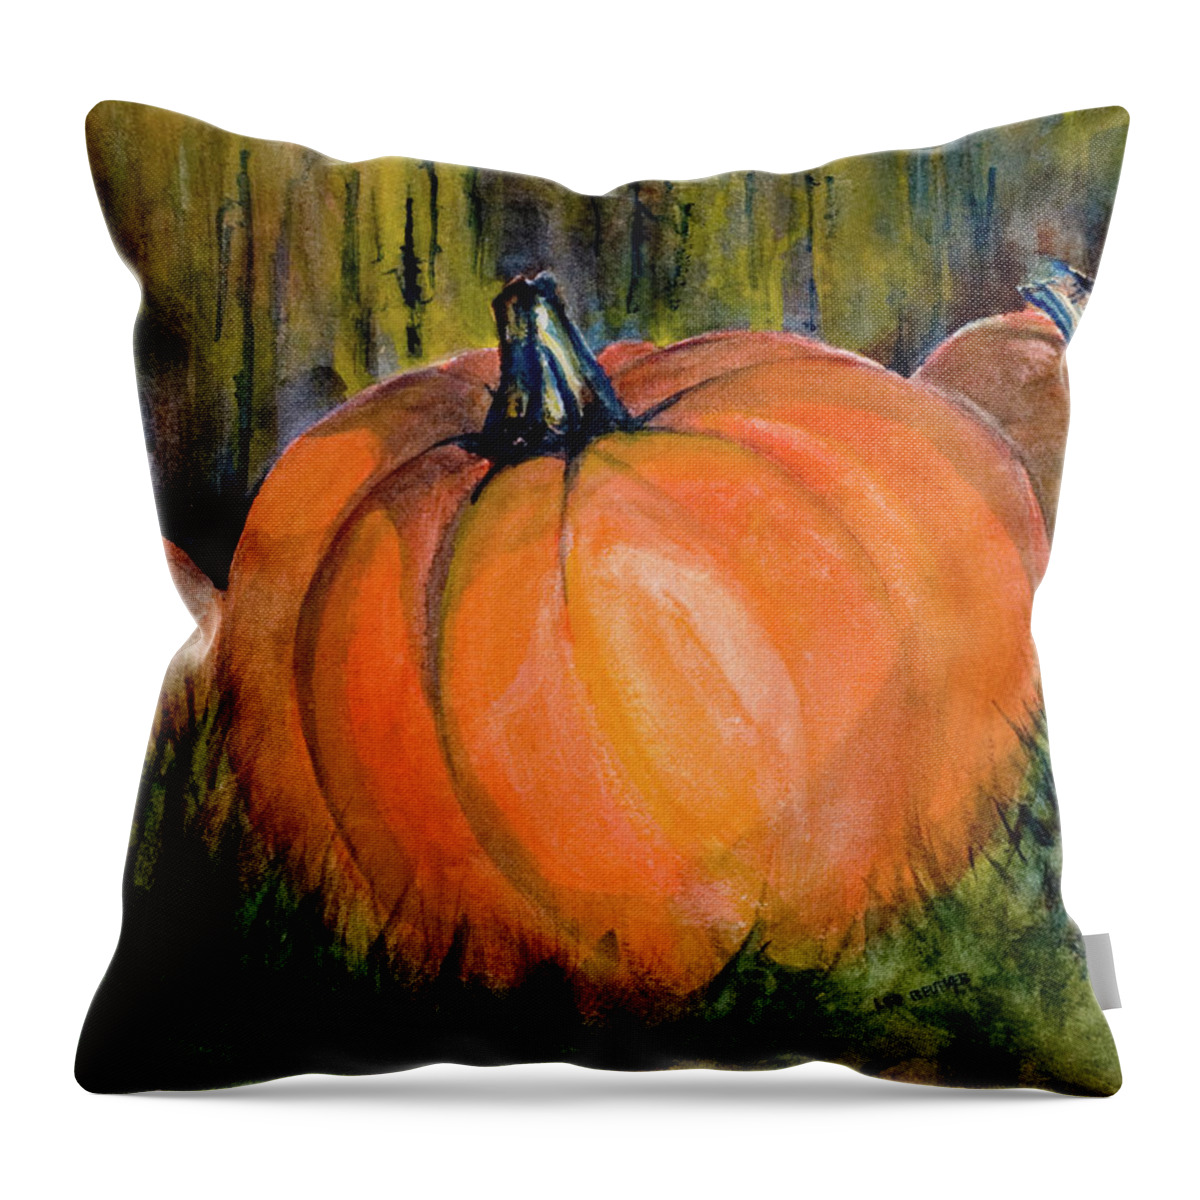 Pumpkins Throw Pillow featuring the painting Blue Ribbon by Lee Beuther